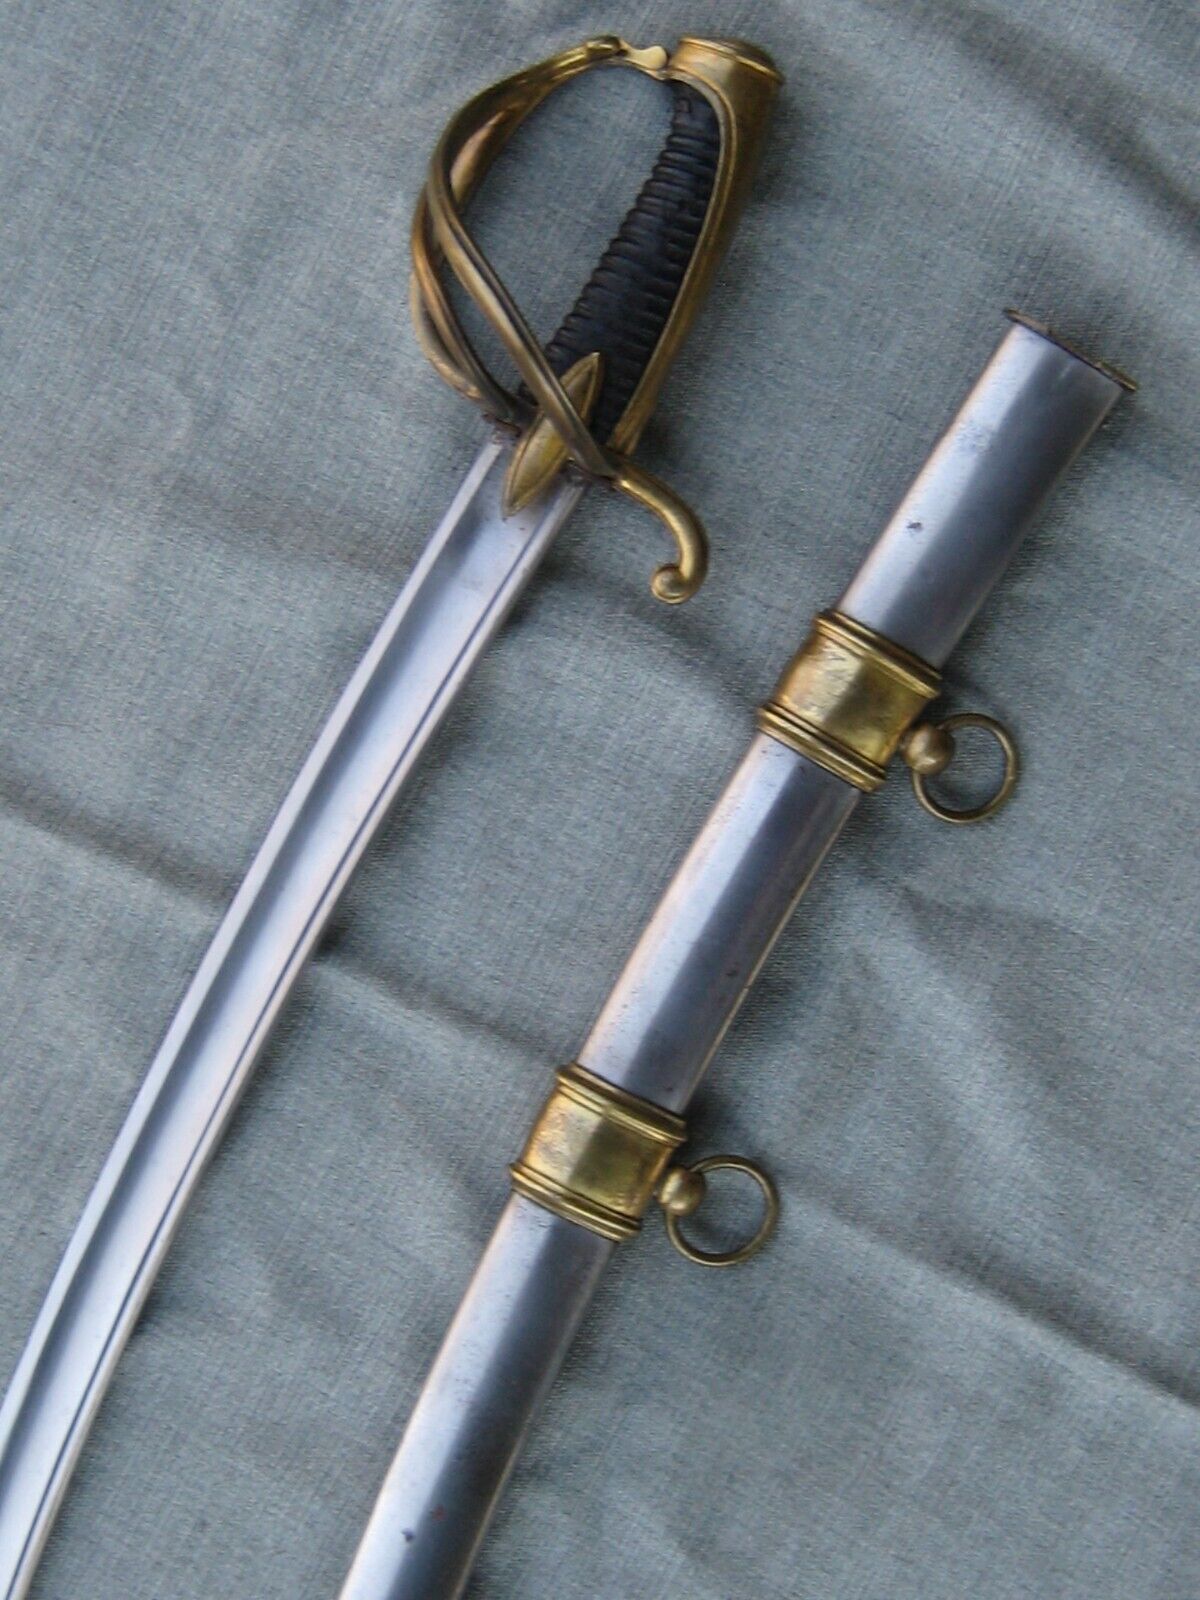 FRENCH OFFICER'S NAPOLEONIC LIGHT CAVALRY SWORD